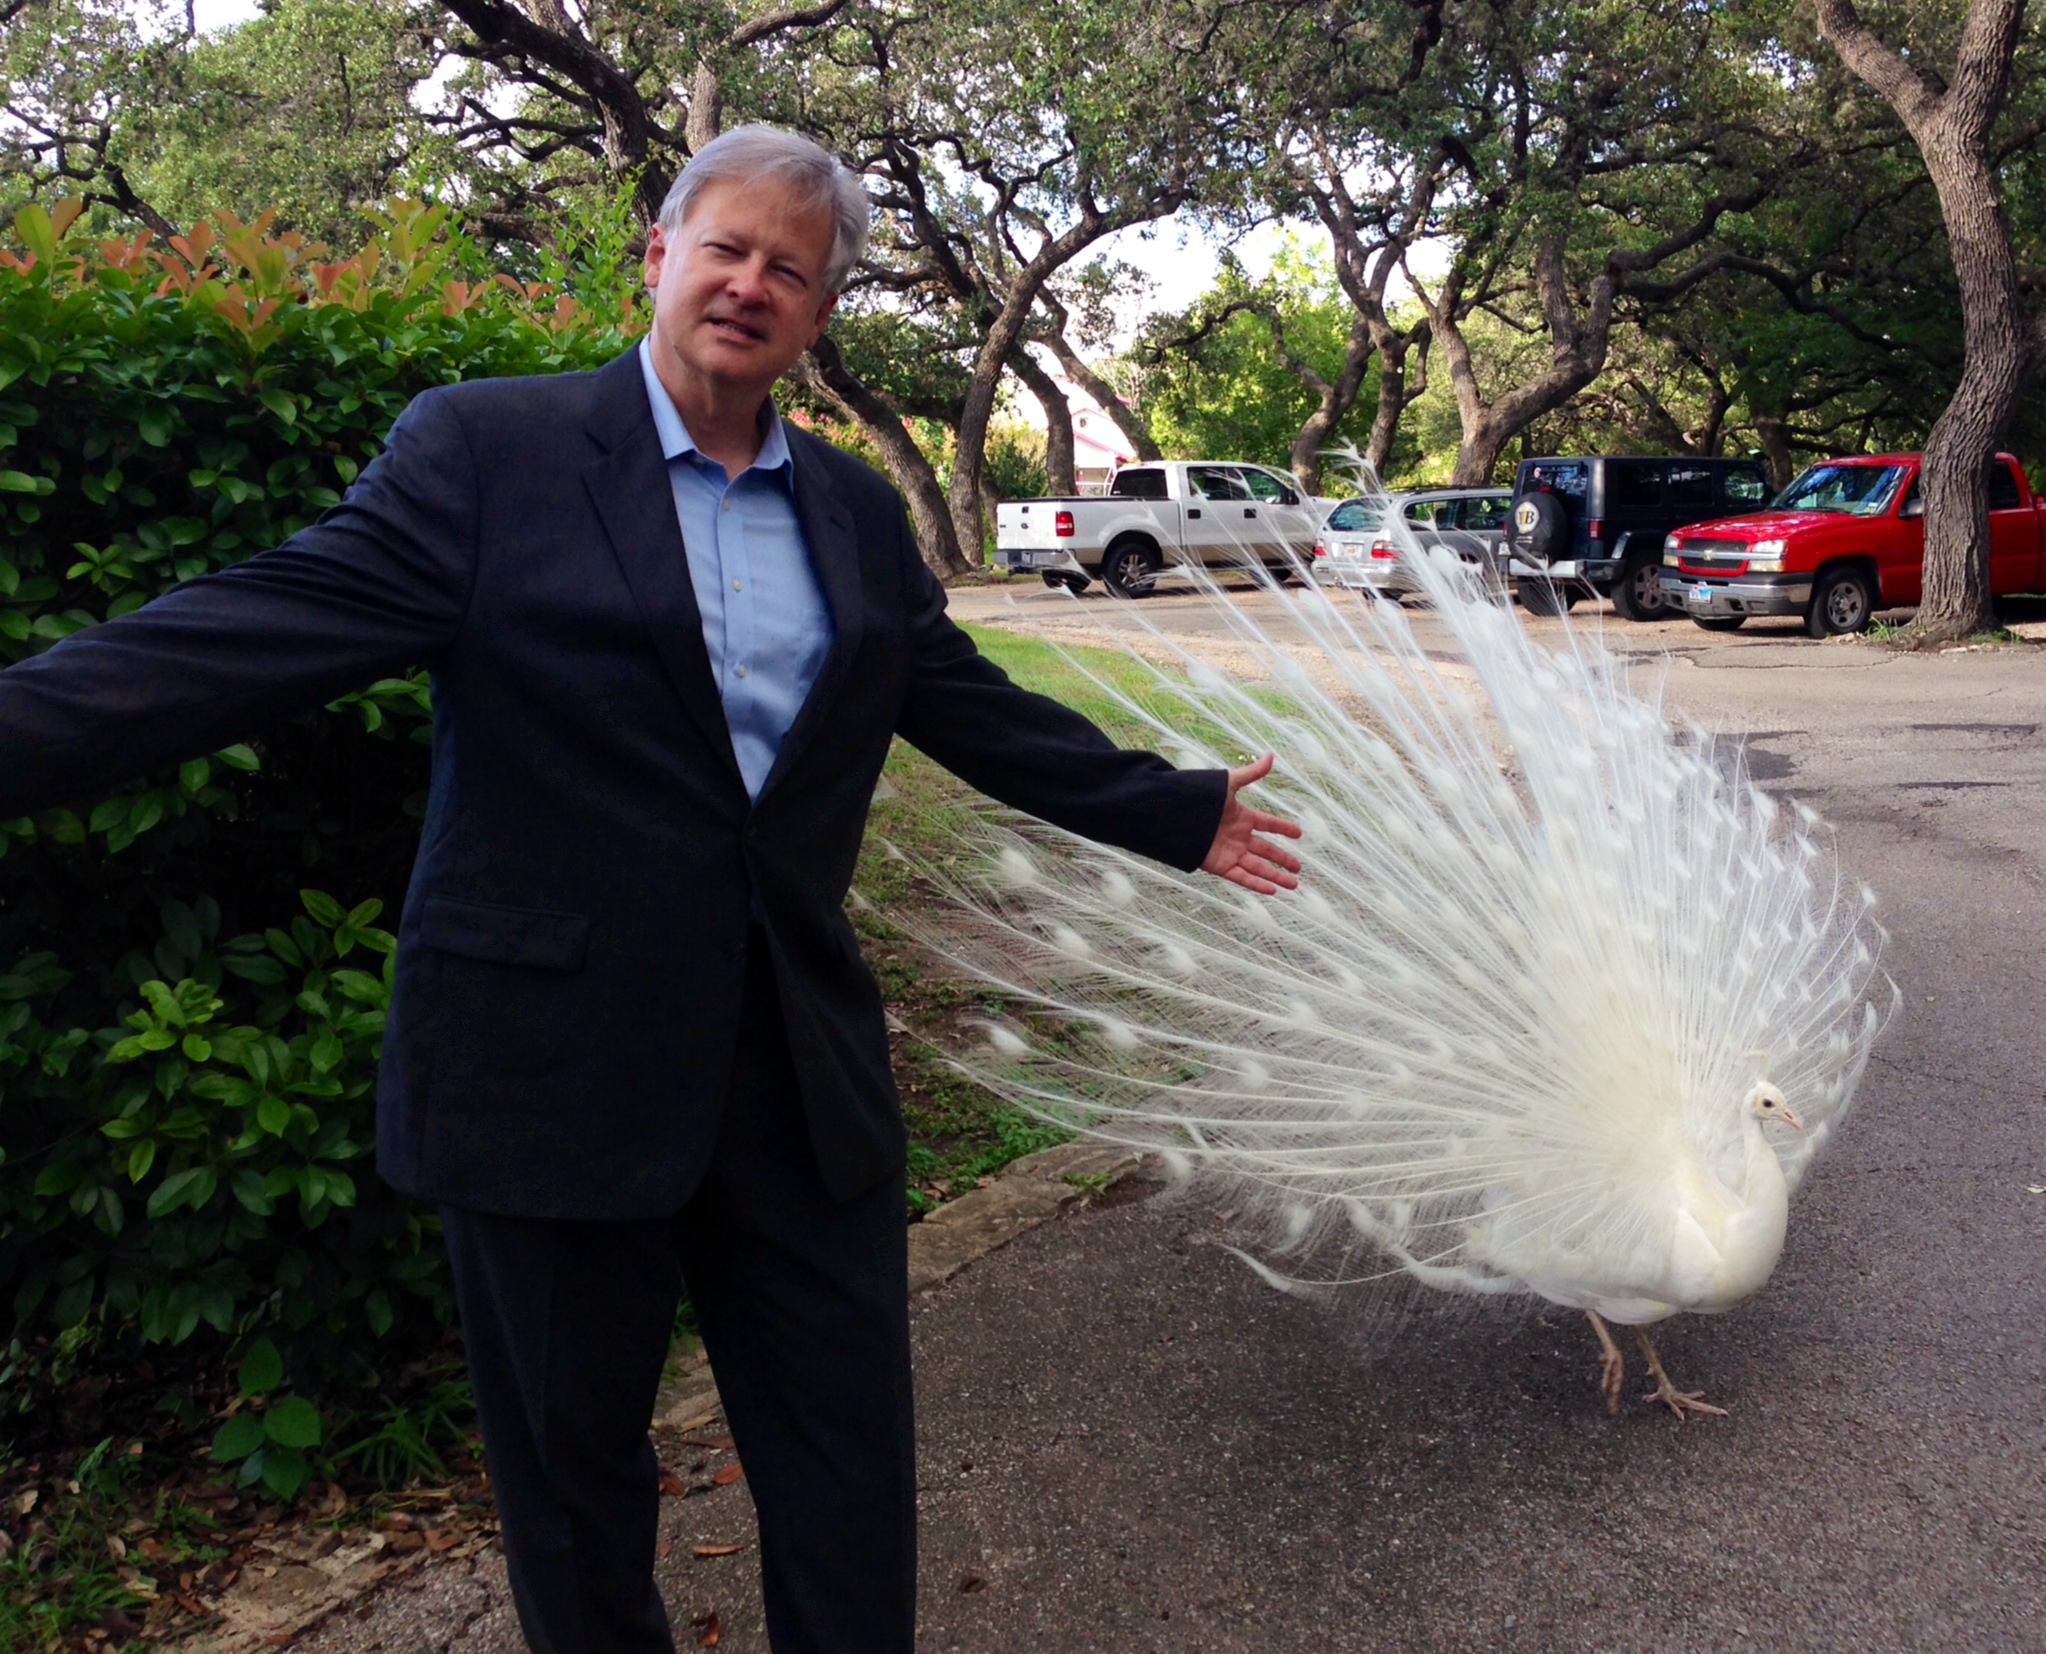 Alan and the White Peacock.